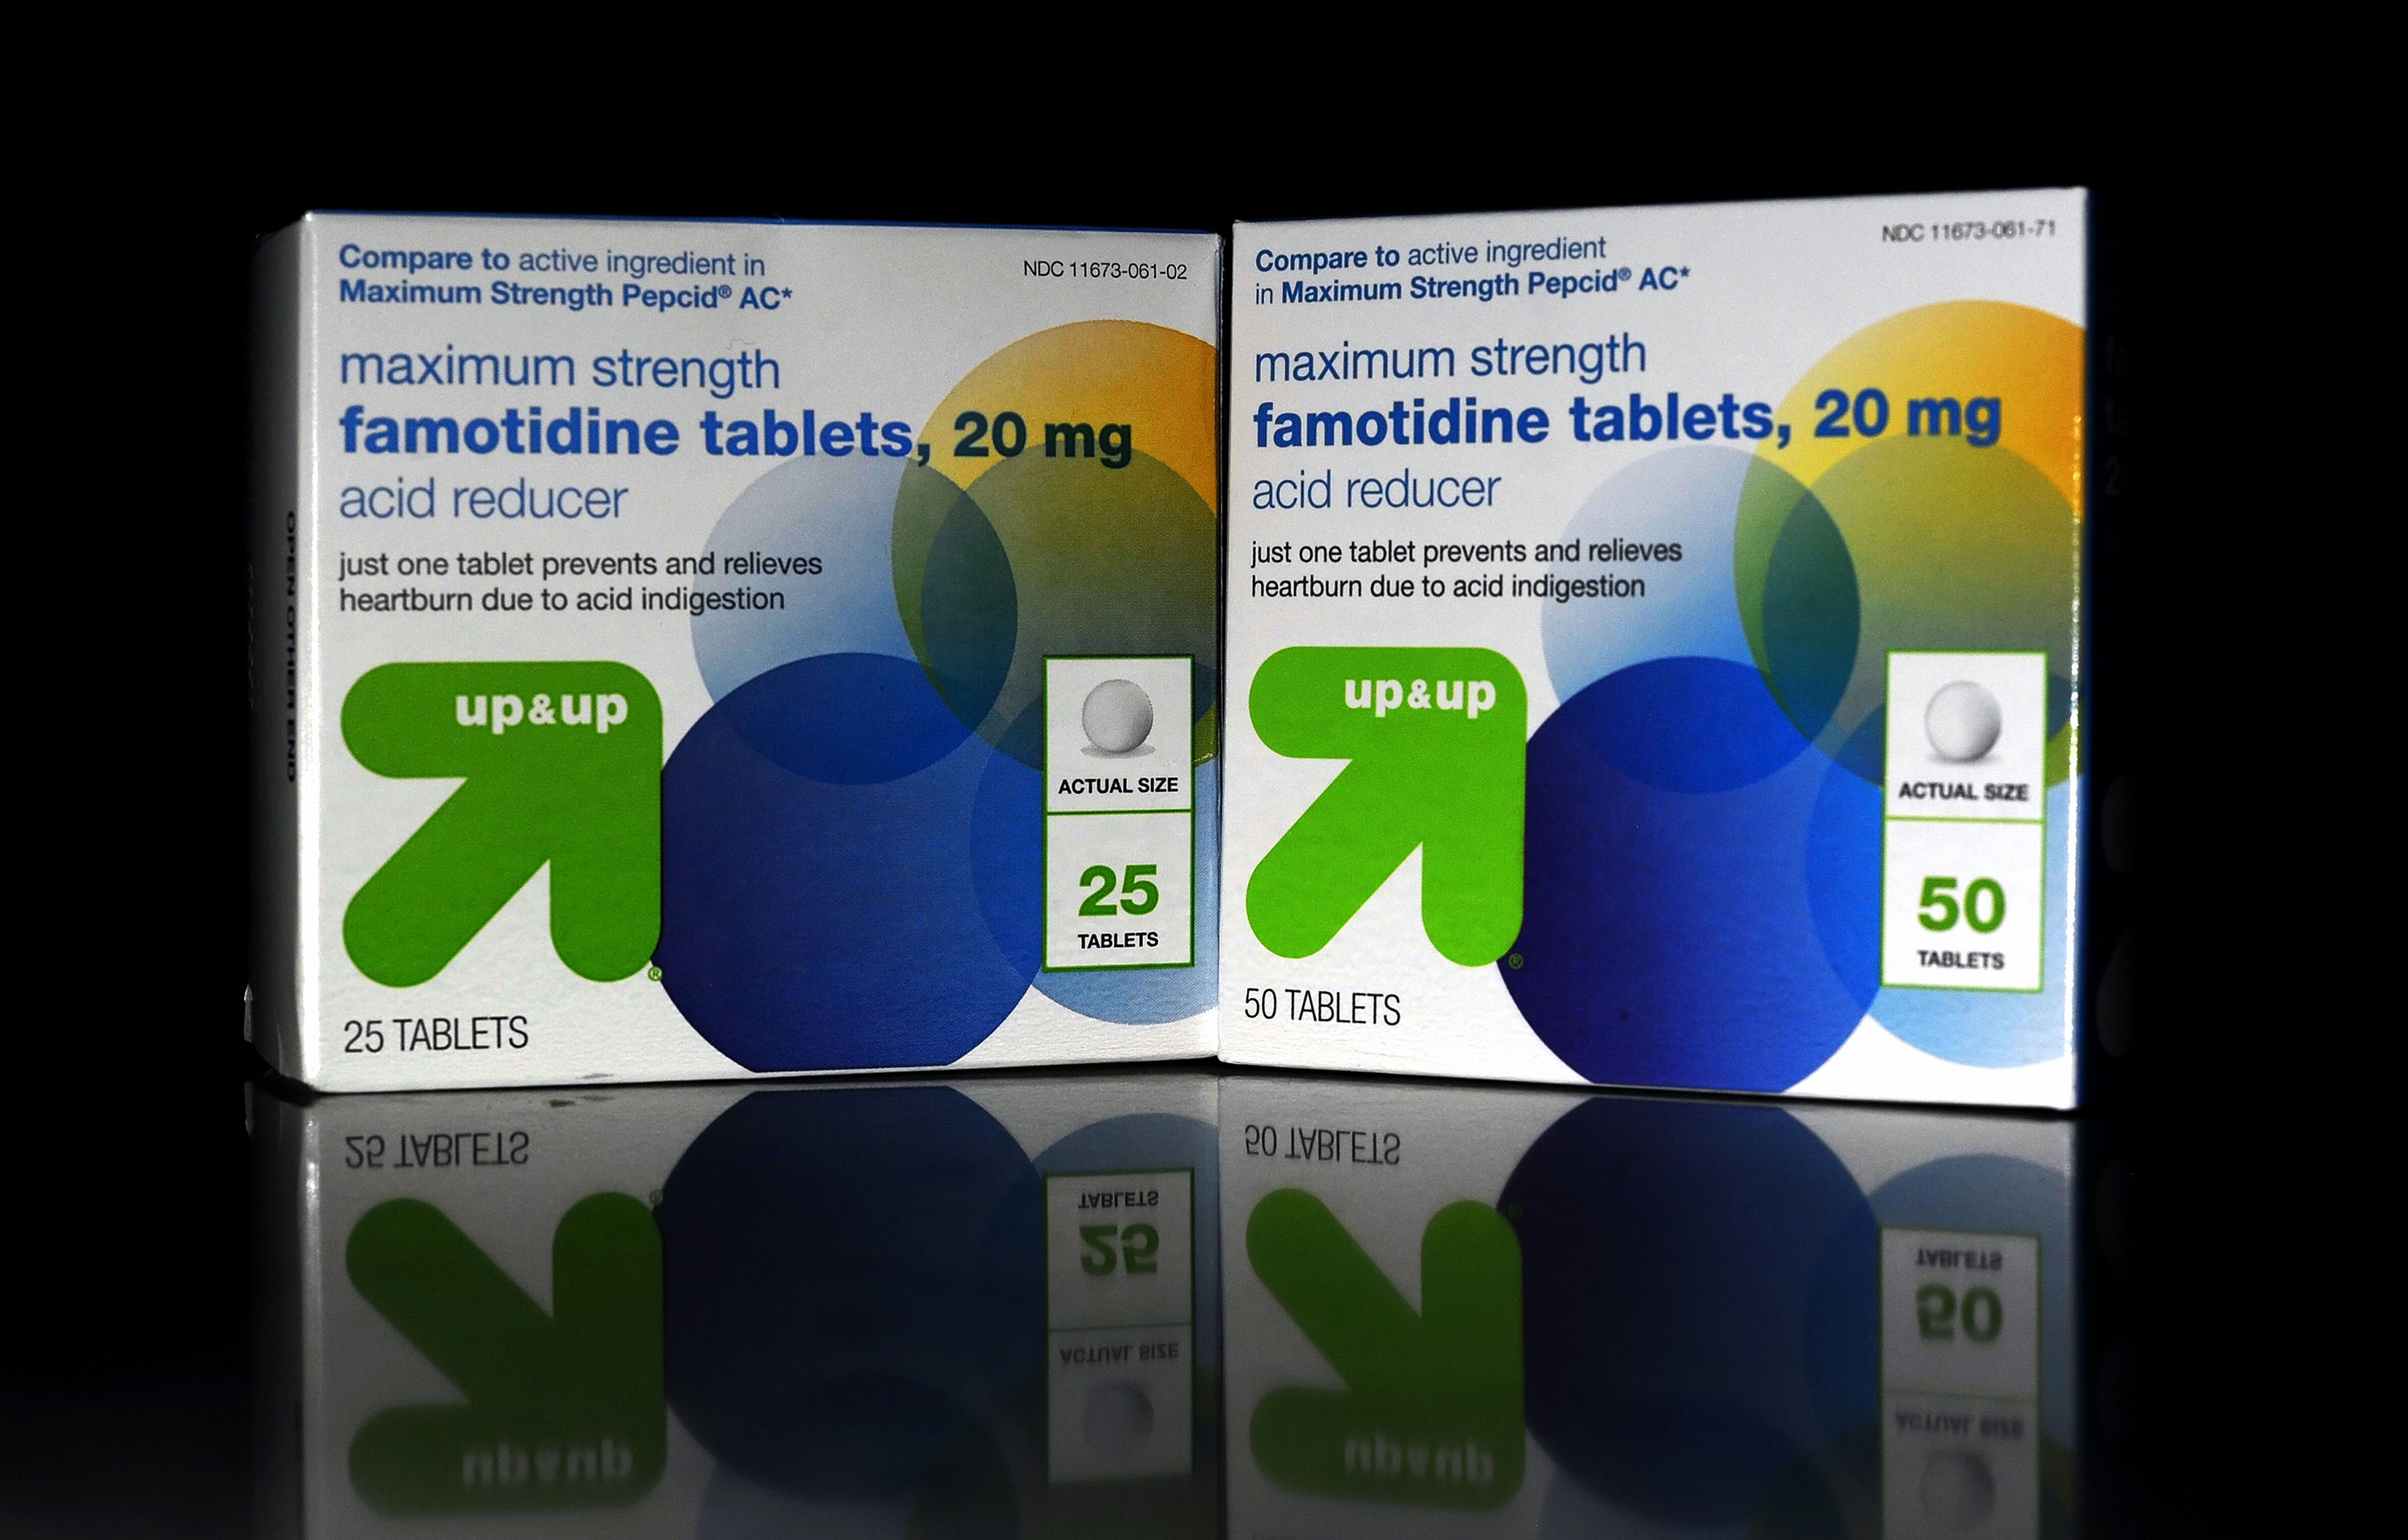 Packages of famotidine tablets are seen in this photo taken on April 27 in Orlando, Florida.